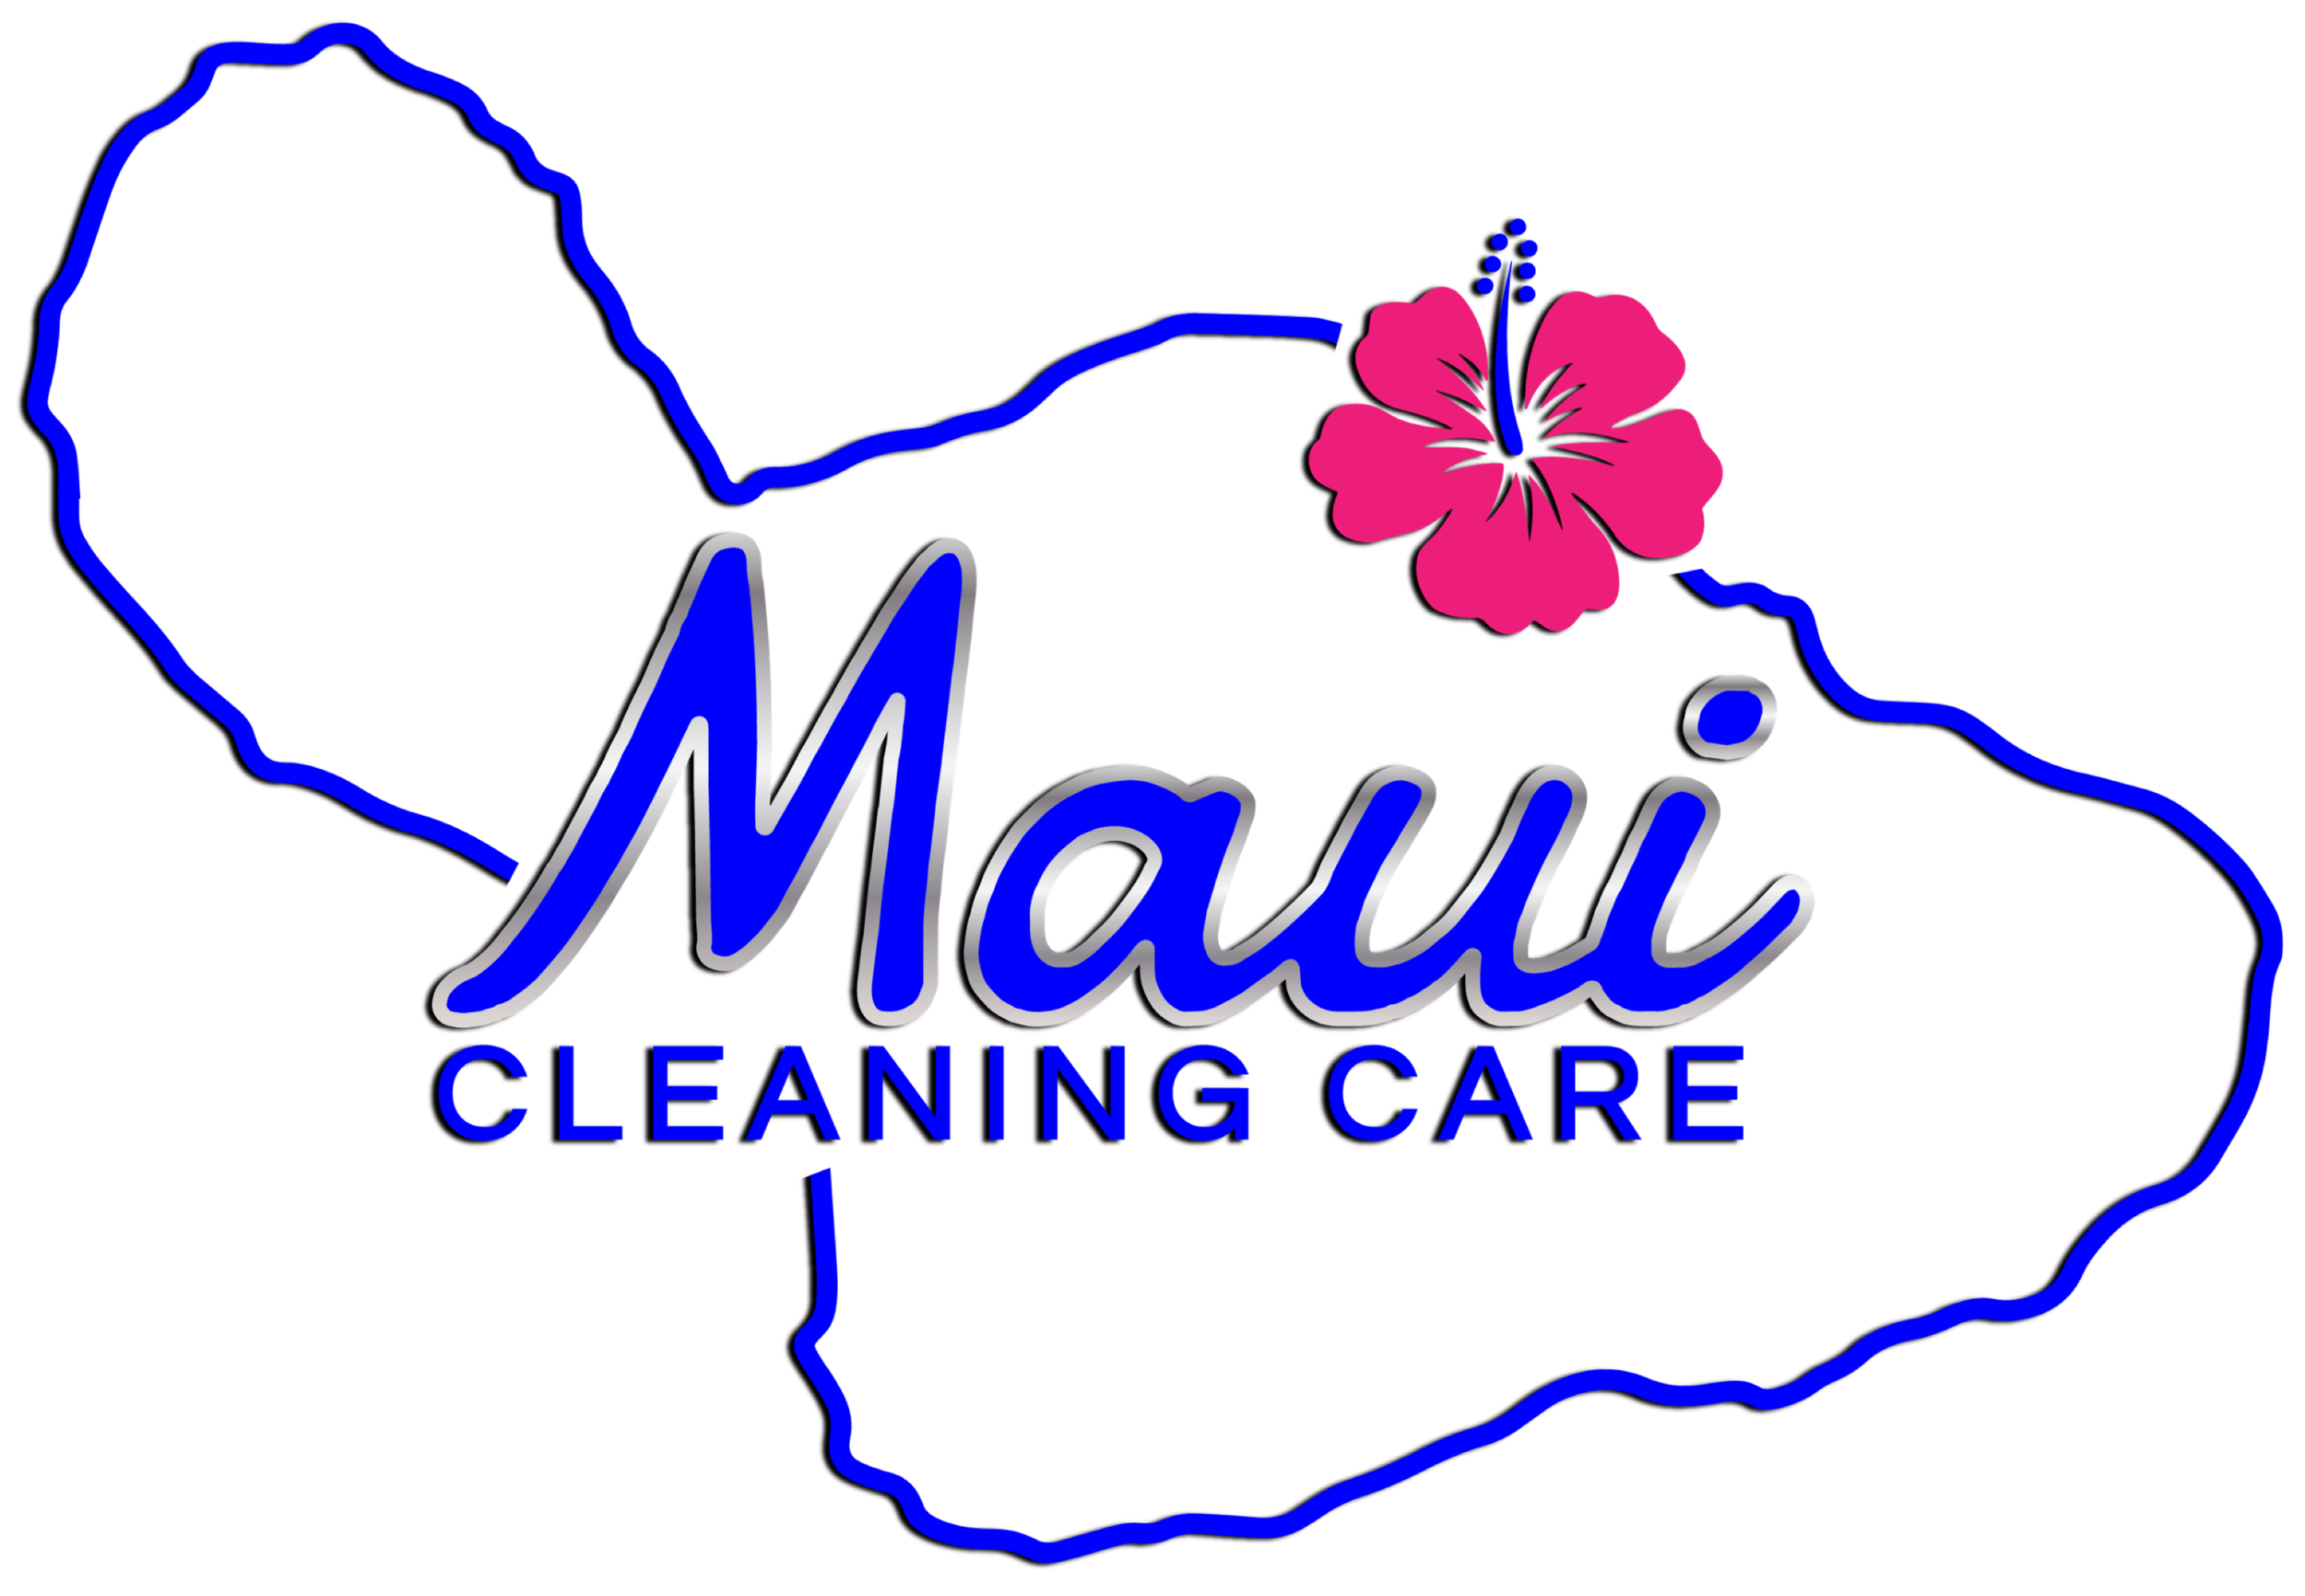 Maui Cleaning Care